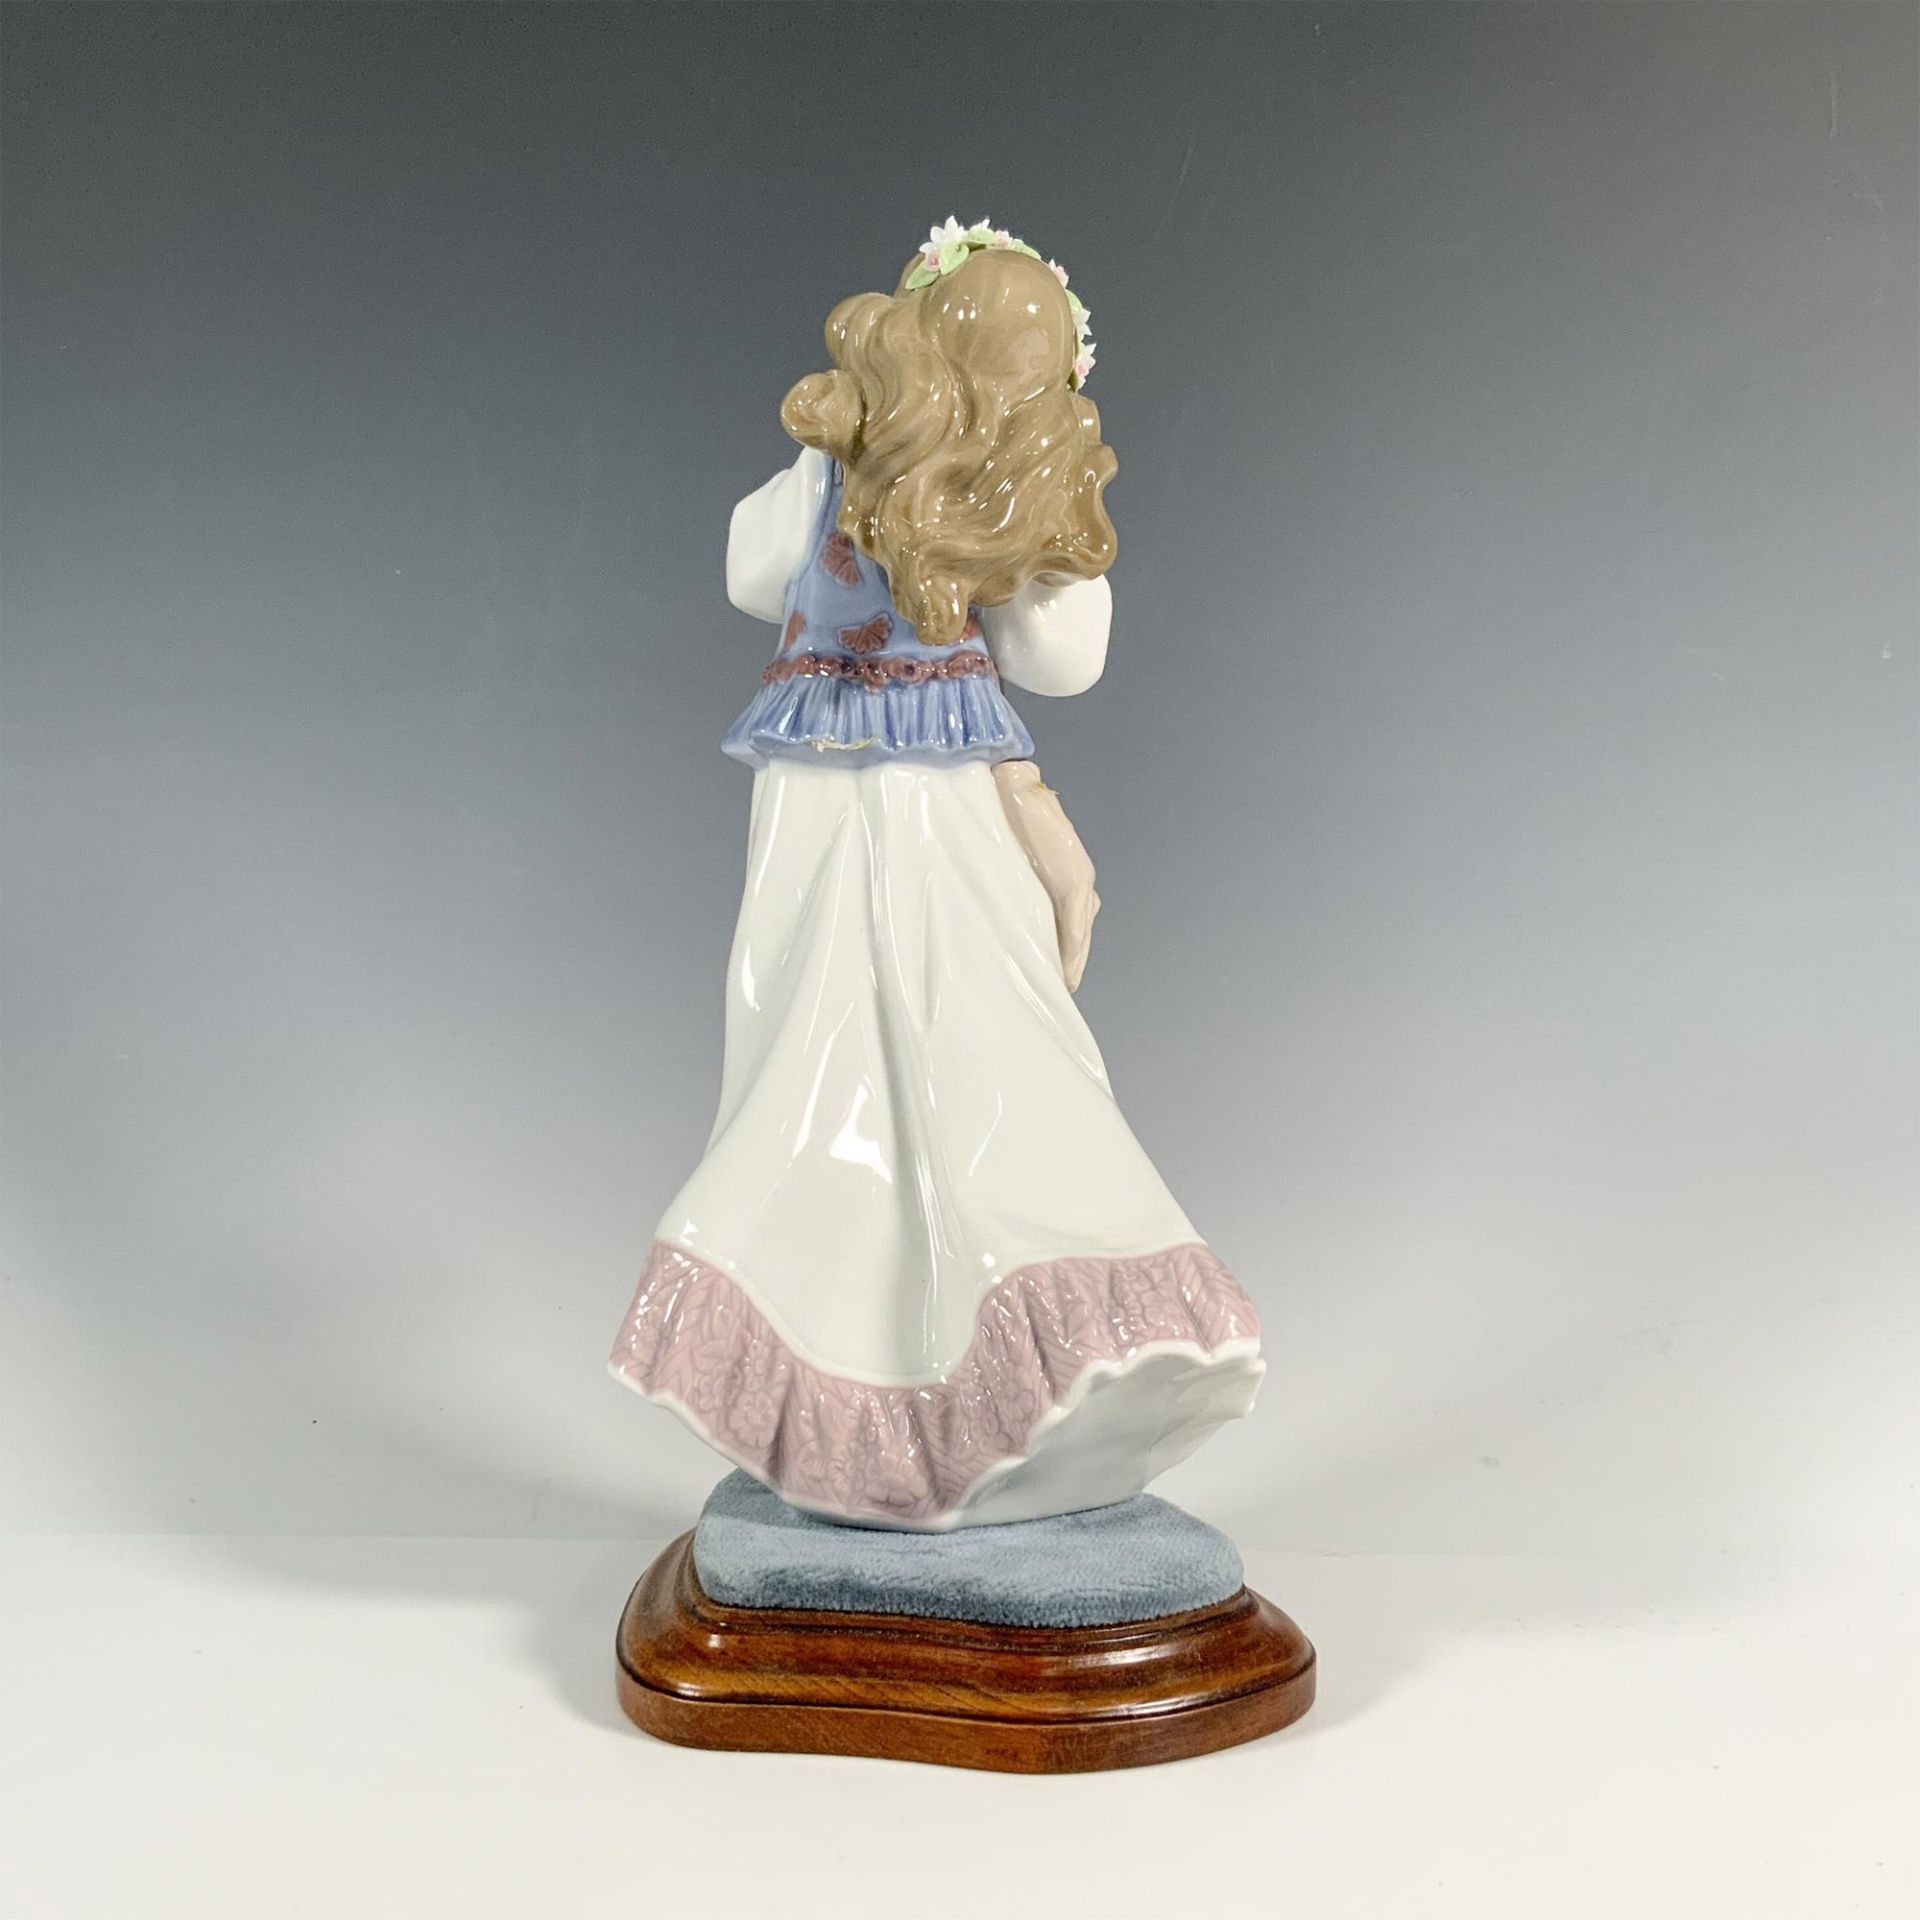 Dreams Of A Summer Past 1006401 - Lladro Porcelain Figurine - Image 2 of 4